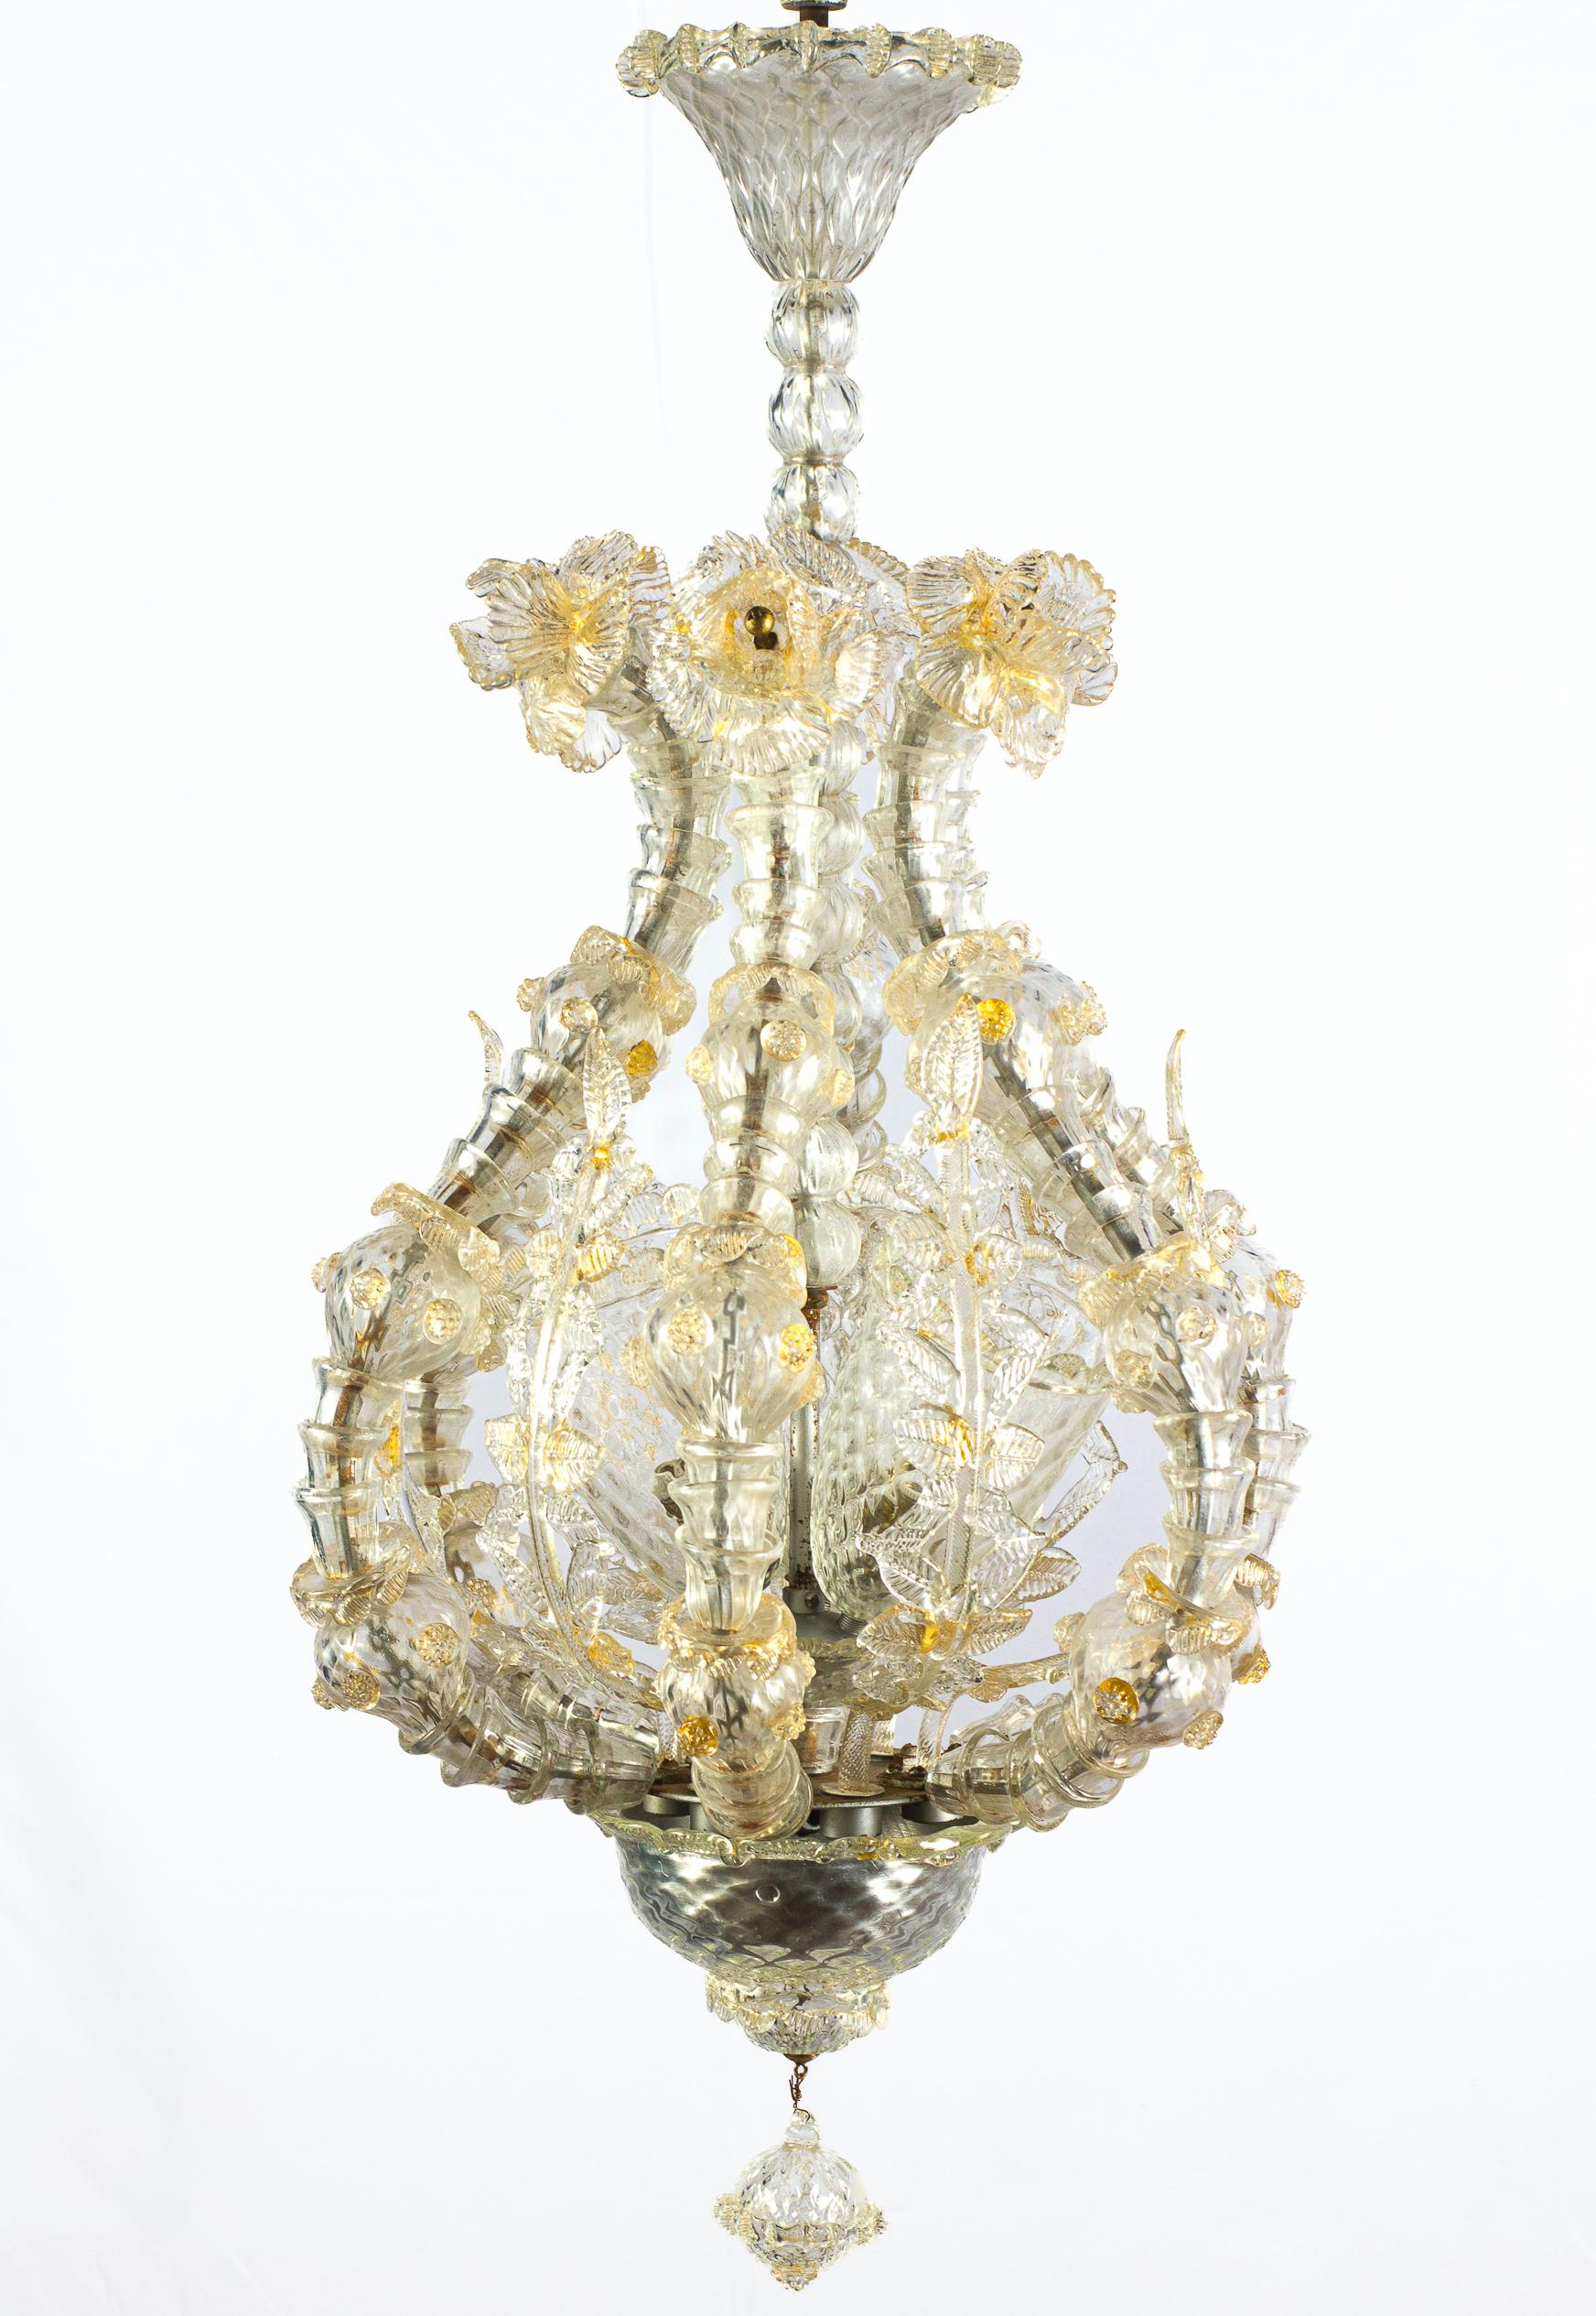 Magnificent pendant with six arms with details gold inclusions. Heads of lions are the ball falls background.
 Centered with three finely handblown cups. Richly decorated with leaves and flowers. 
 The chandelier comes from the private collection